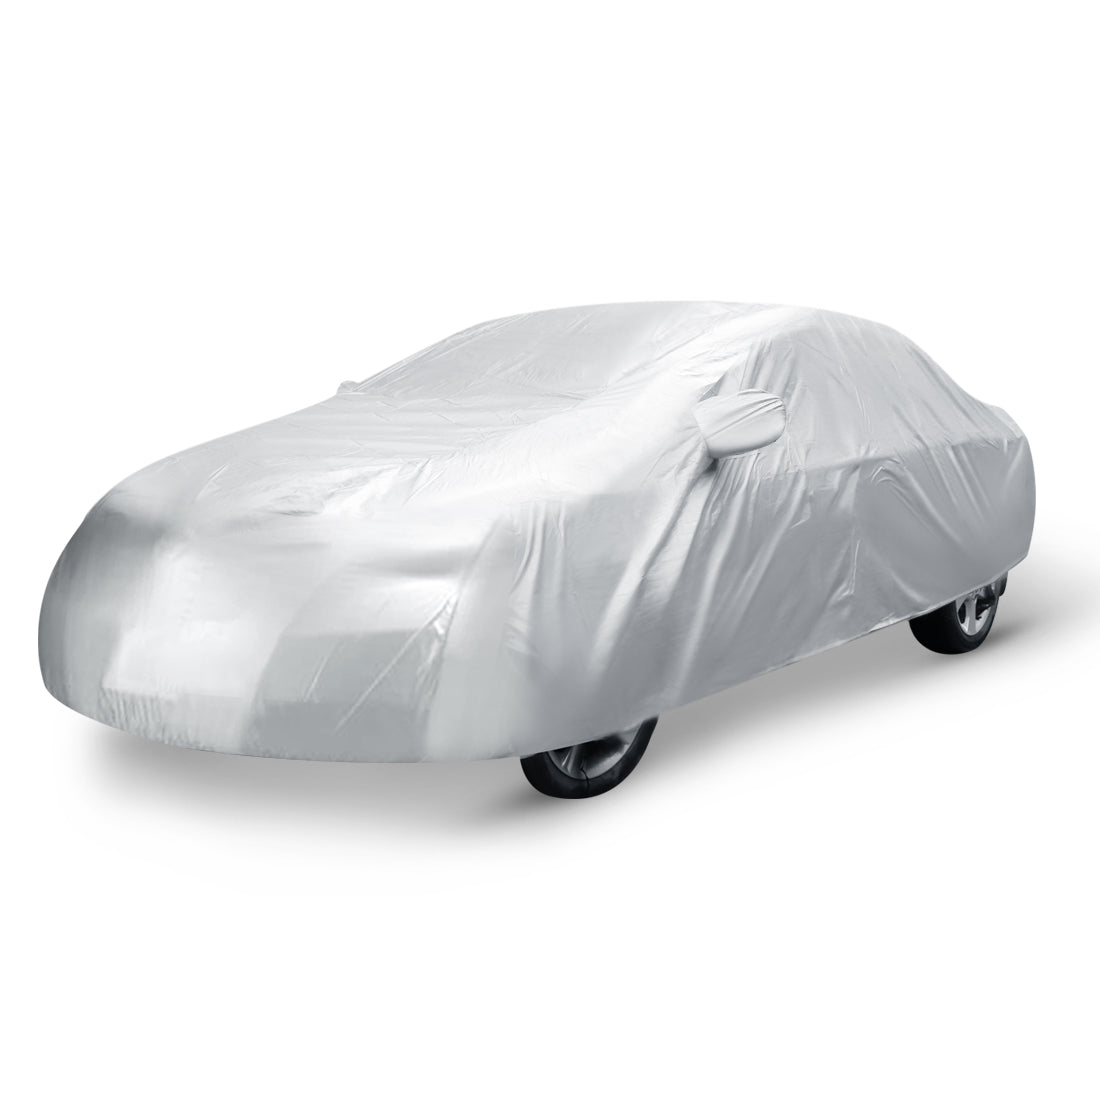 uxcell Uxcell Car Cover Waterproof Outdoor Sun Rain Resistant Protection for Toyota Corolla 4.7M x 1.8M x 1.5M